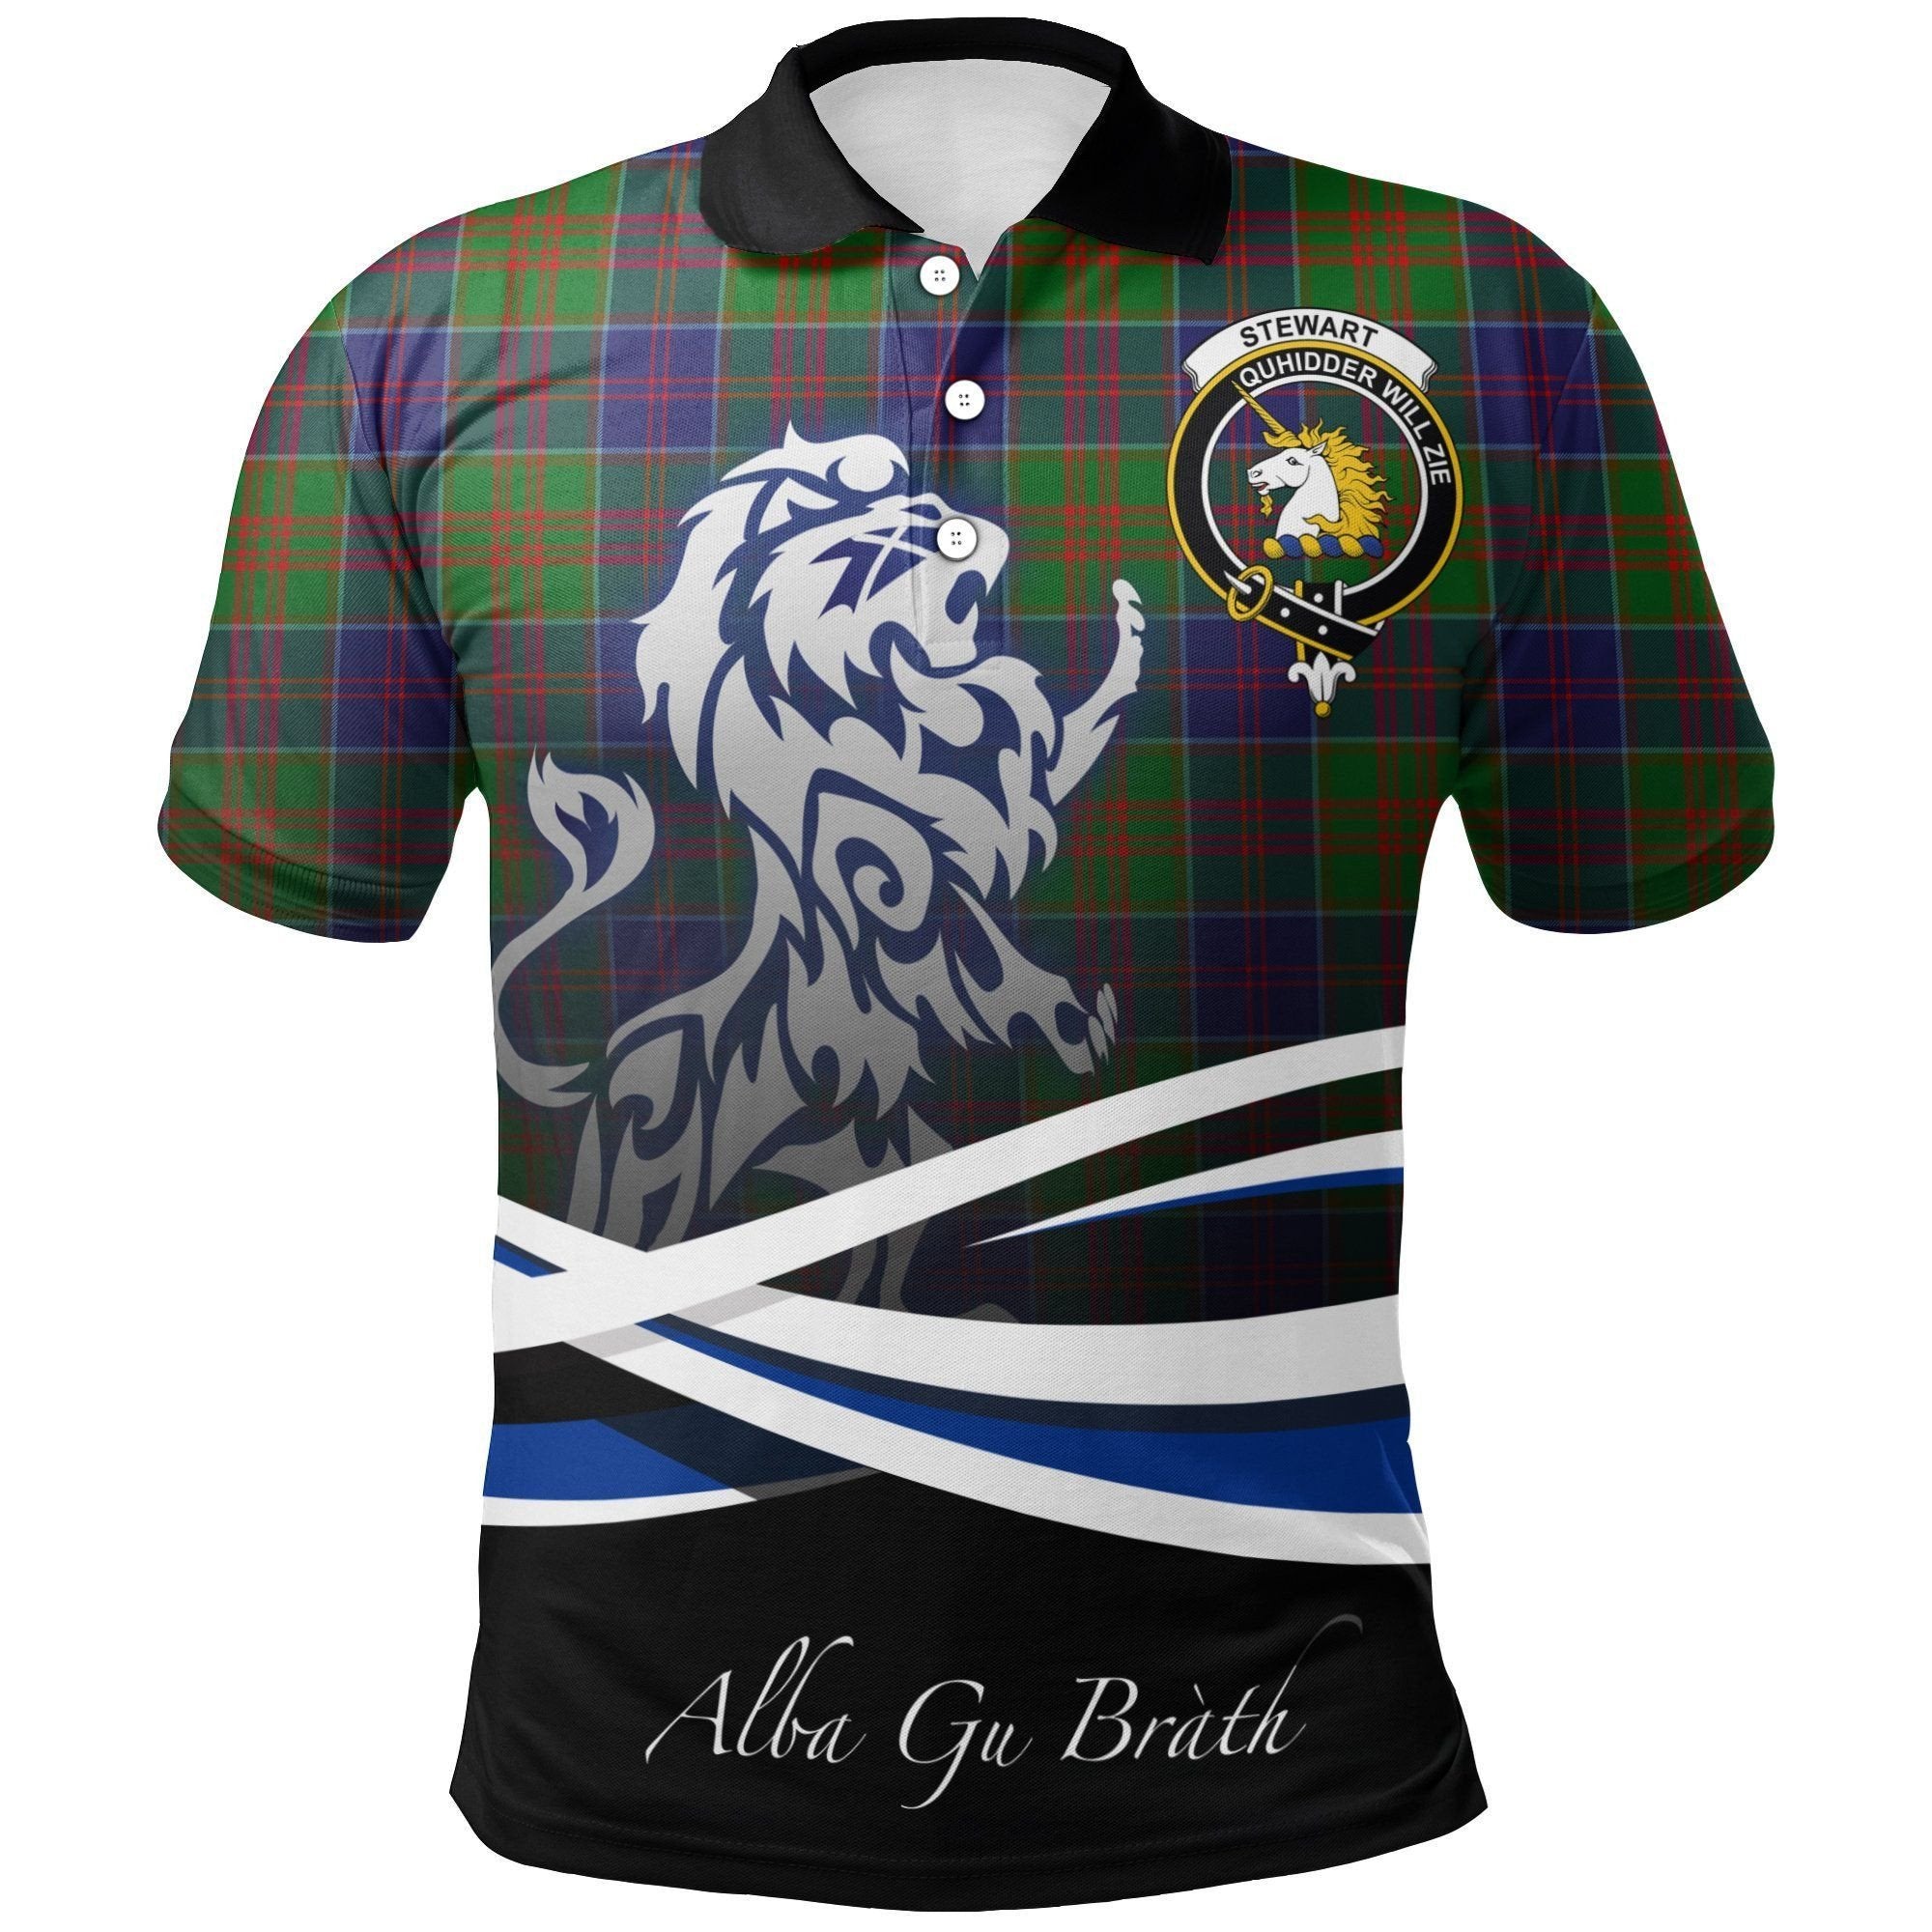 Stewart of Appin Hunting Modern Clan Polo Shirt, Scottish Tartan Stewart of Appin Hunting Modern Clans Polo Shirt Crest Lion Style